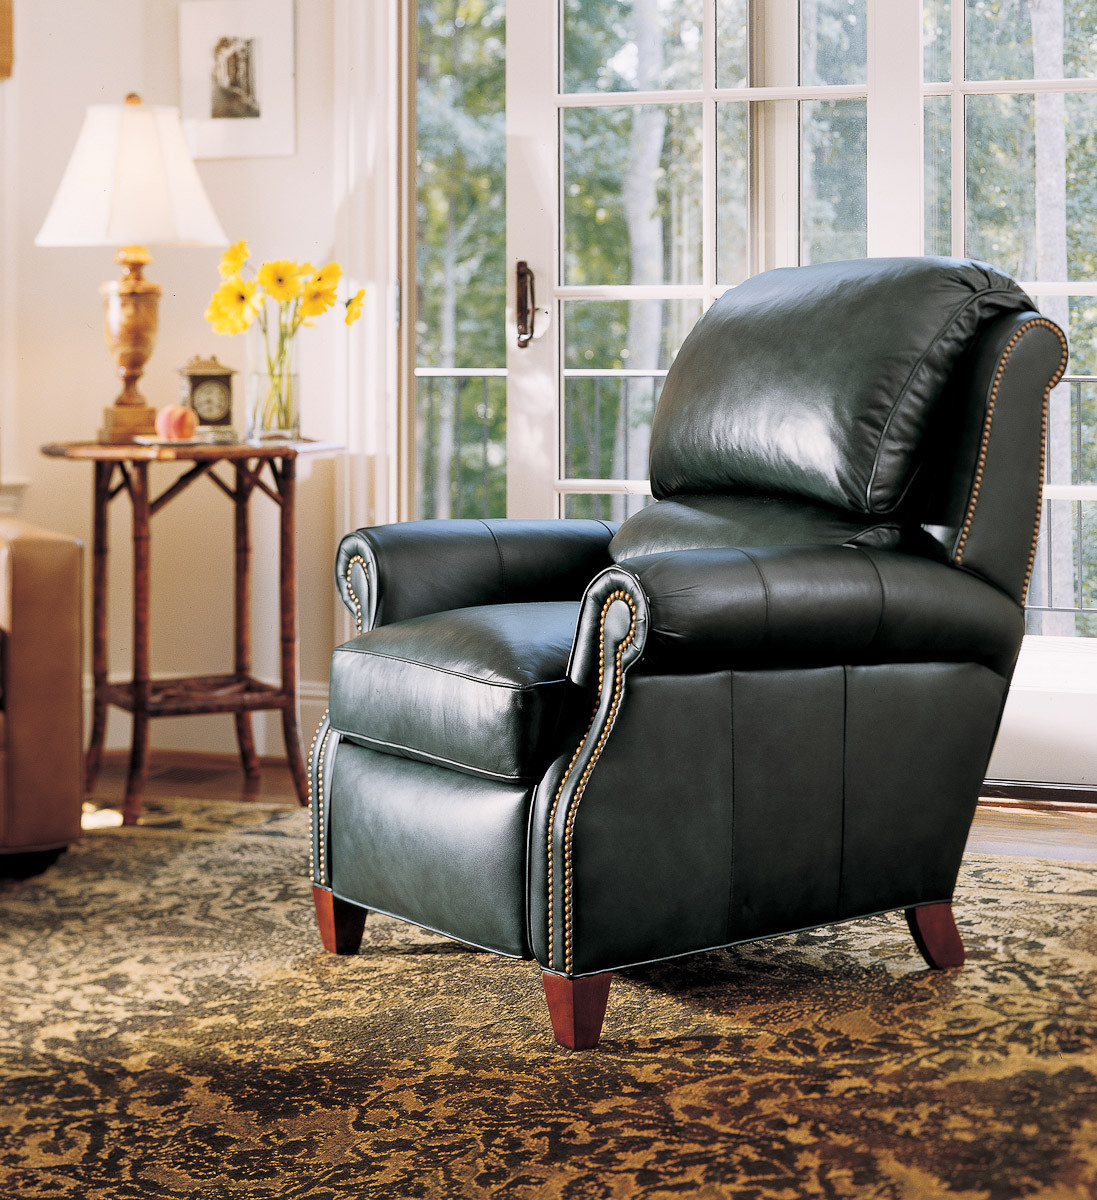 Living Room Recliner Chairs
 Living Room Leather Furniture